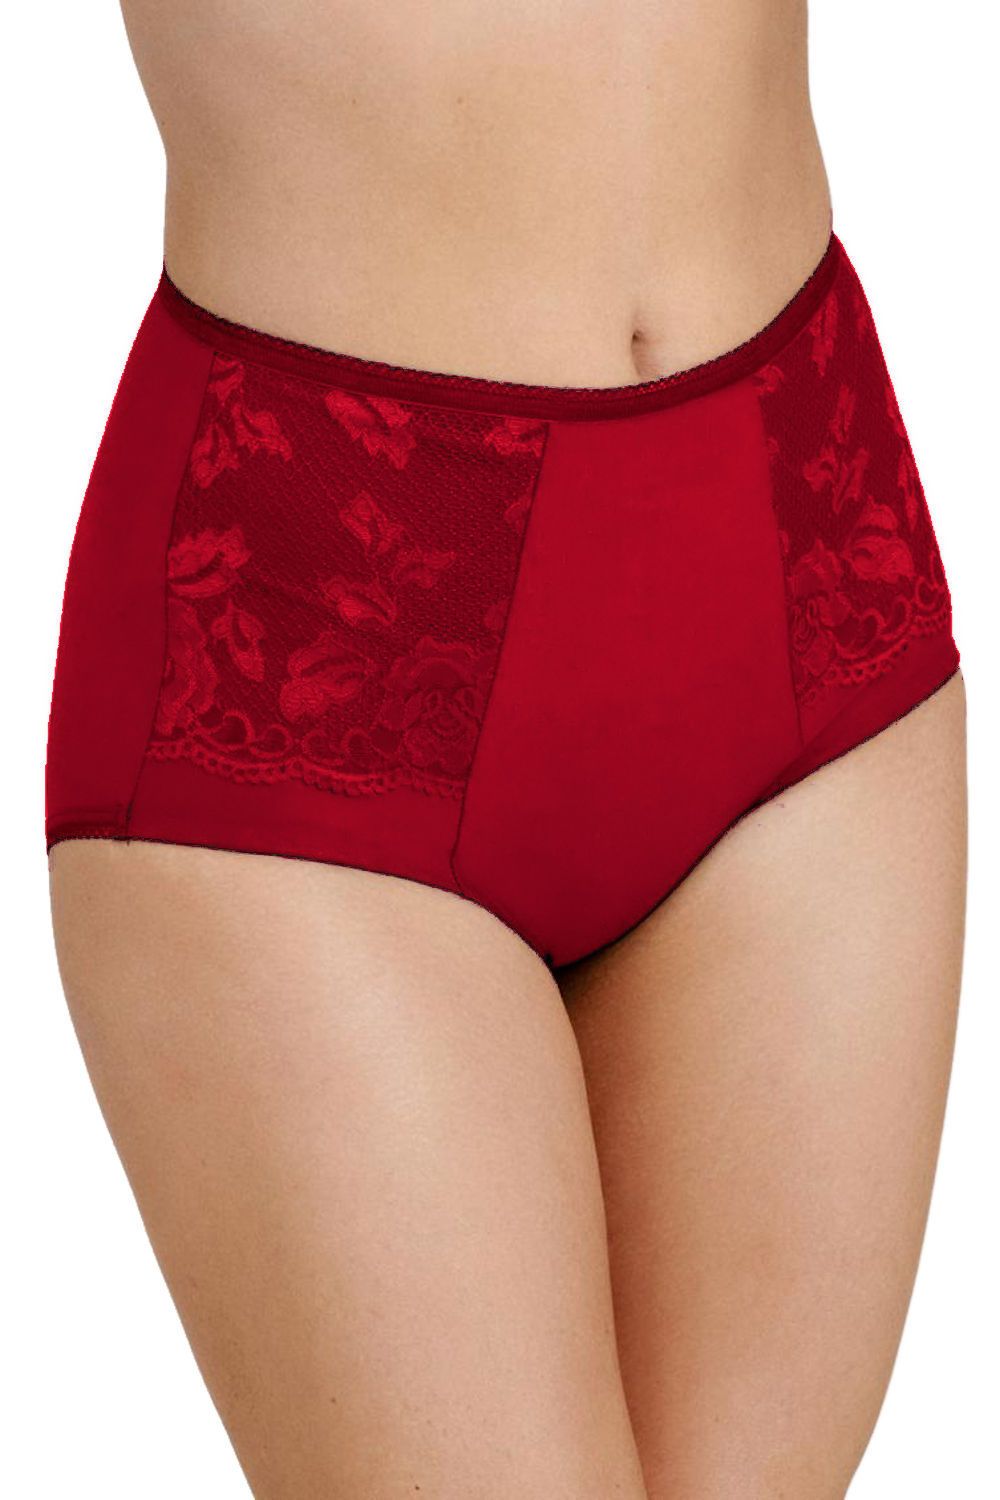 Miss Mary Lovely Lace Support Brief Red  Lumingerie bras and underwear for  big busts